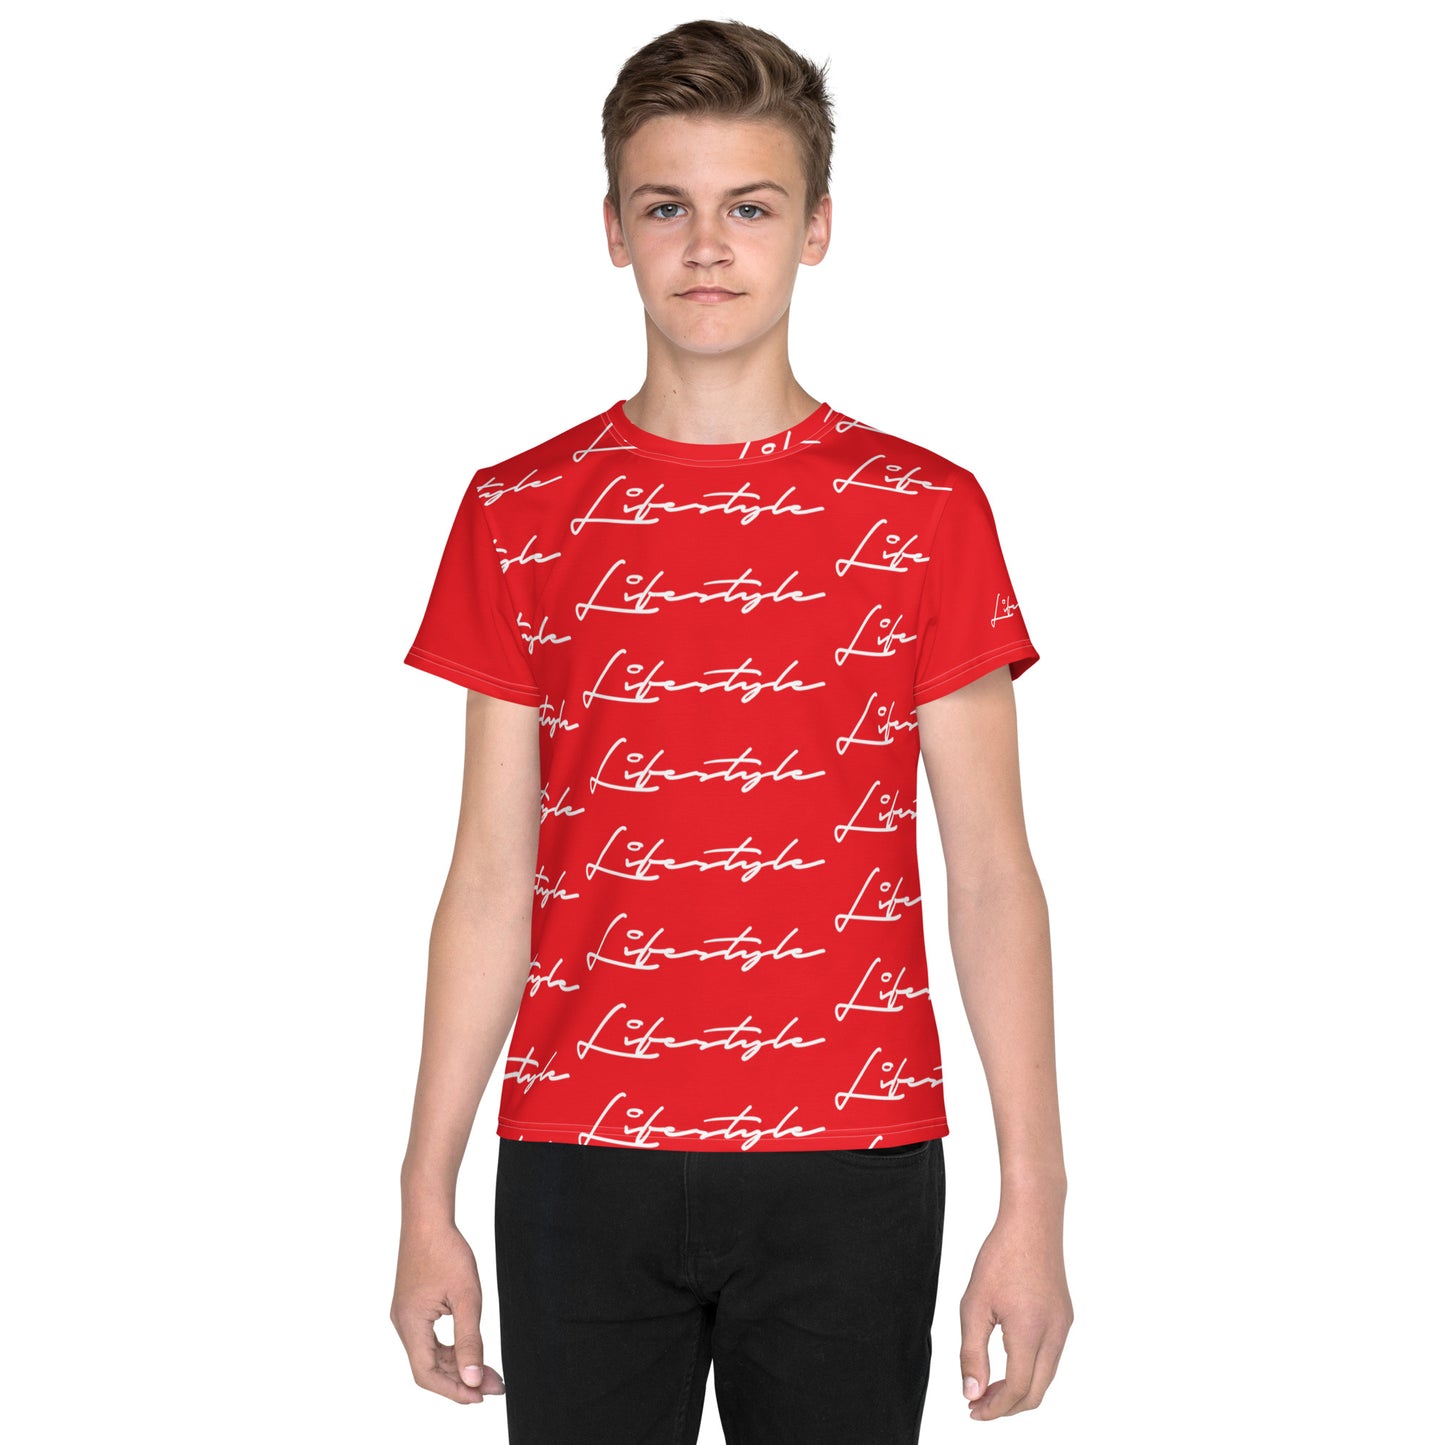 CvLs Lifestyle Youth crew neck t-shirt